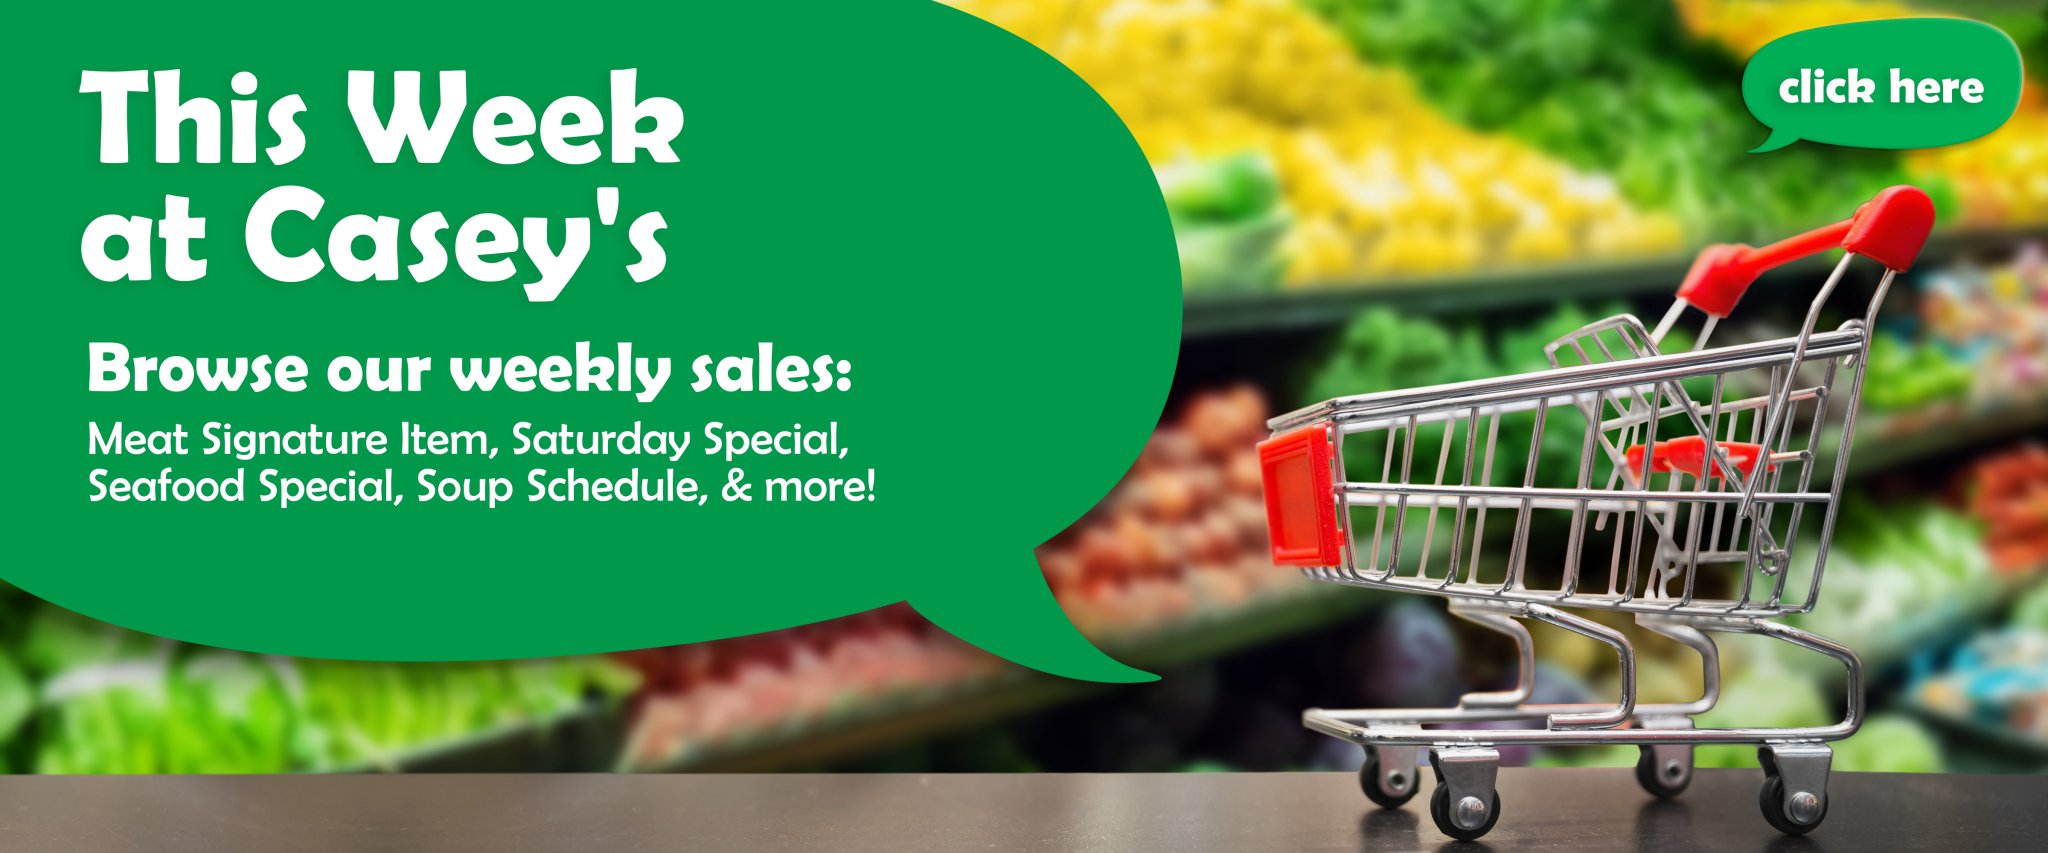 Experience This Week at Casey's! Browse our Weekly Sales: Meat Signature Item, Seafood Special, Saturday Special, and more!